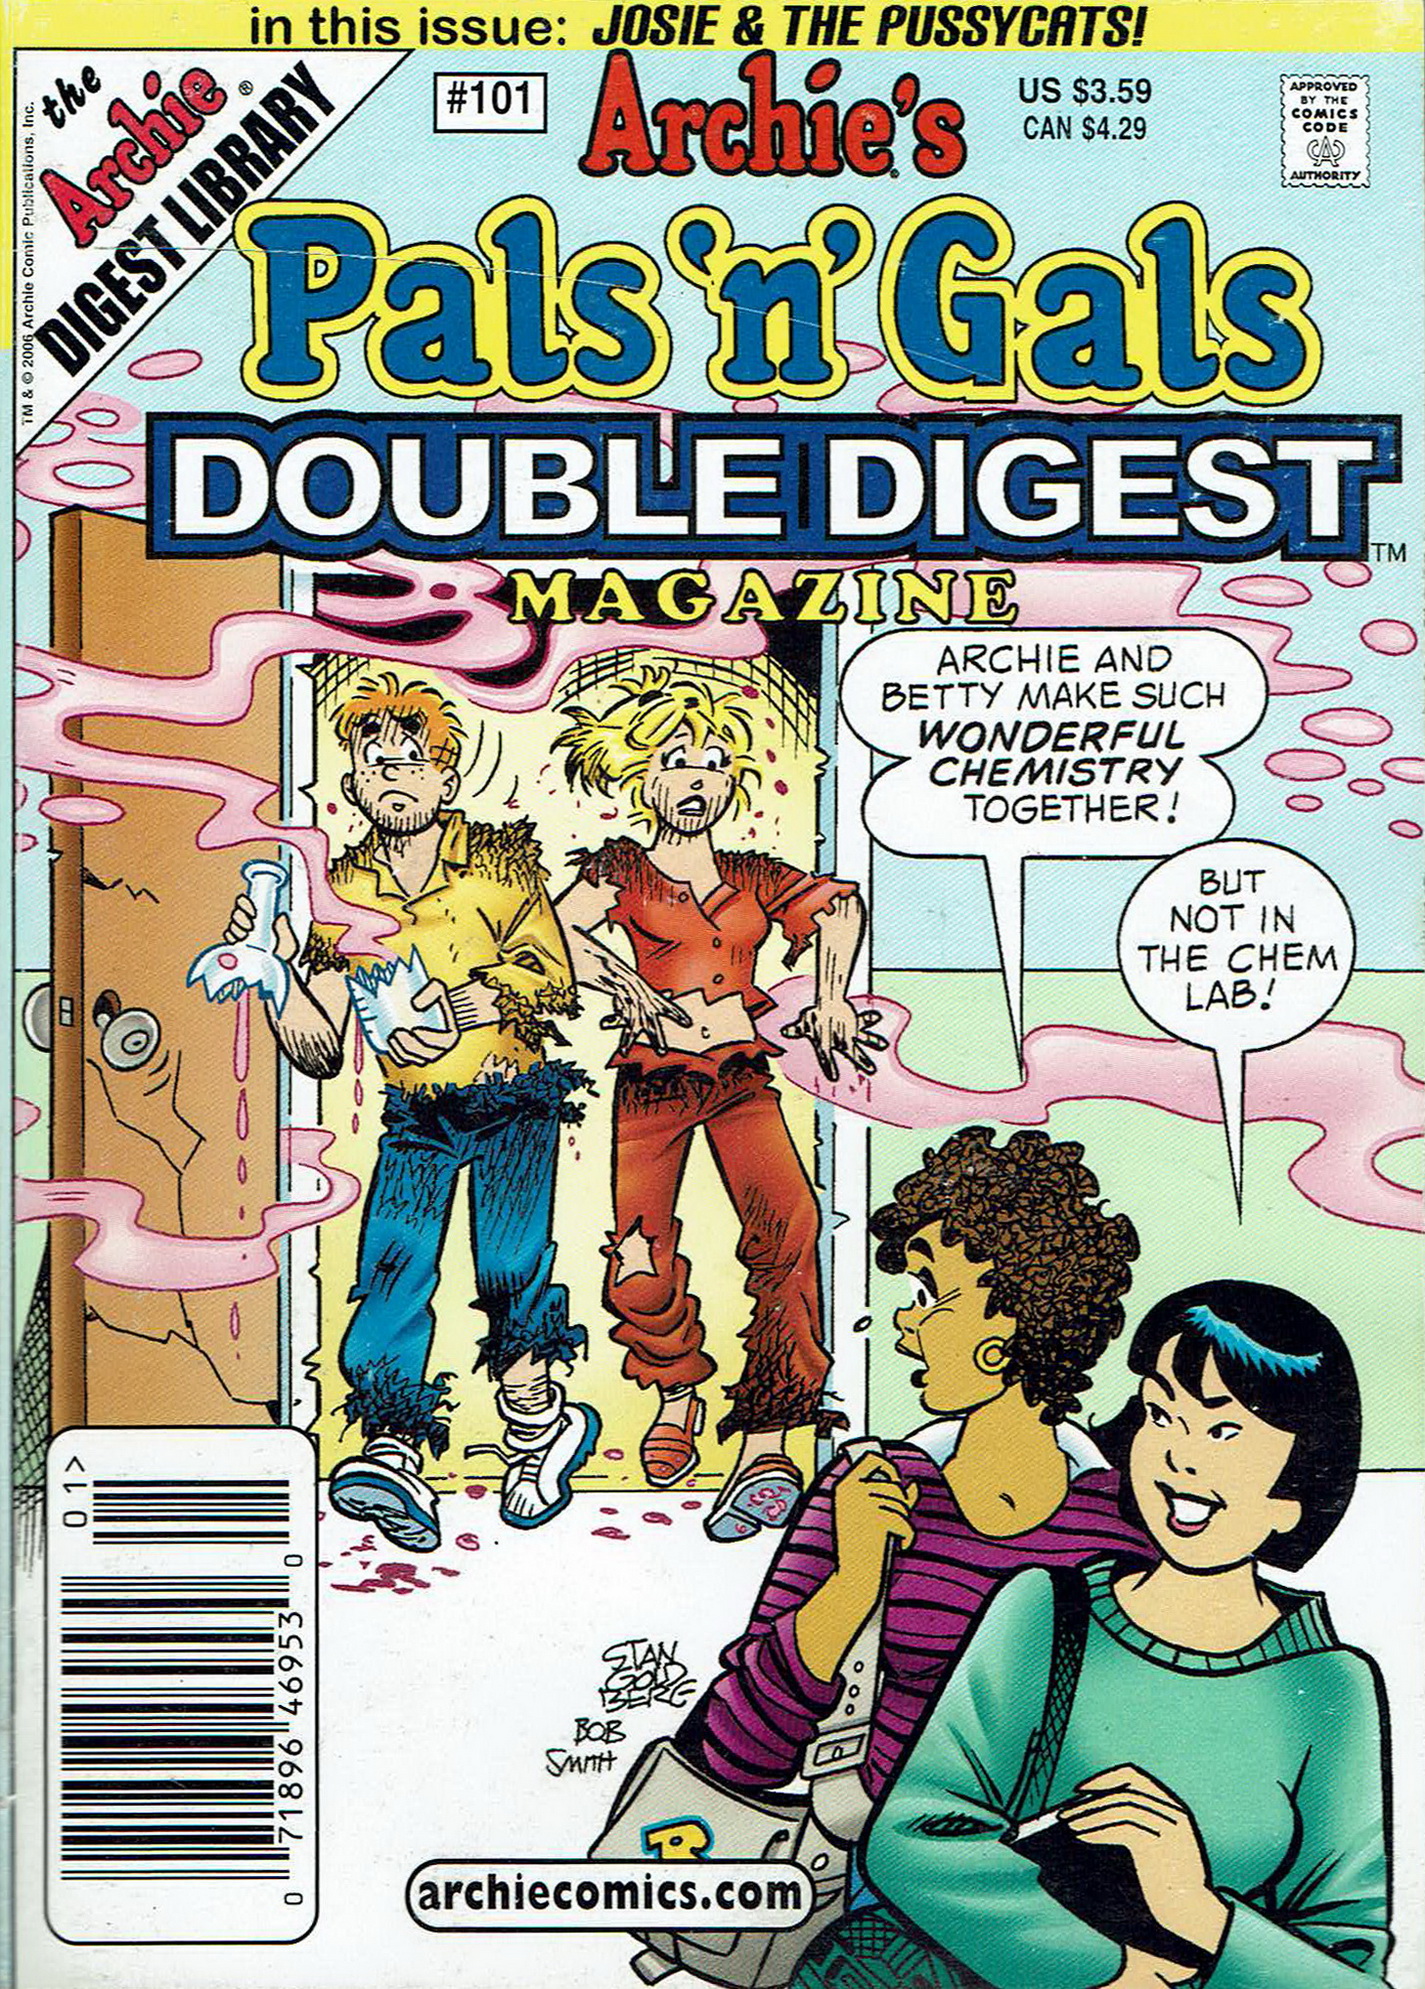 Archie's Pals 'n' Gals Double Digest Magazine issue 101 - Page 1